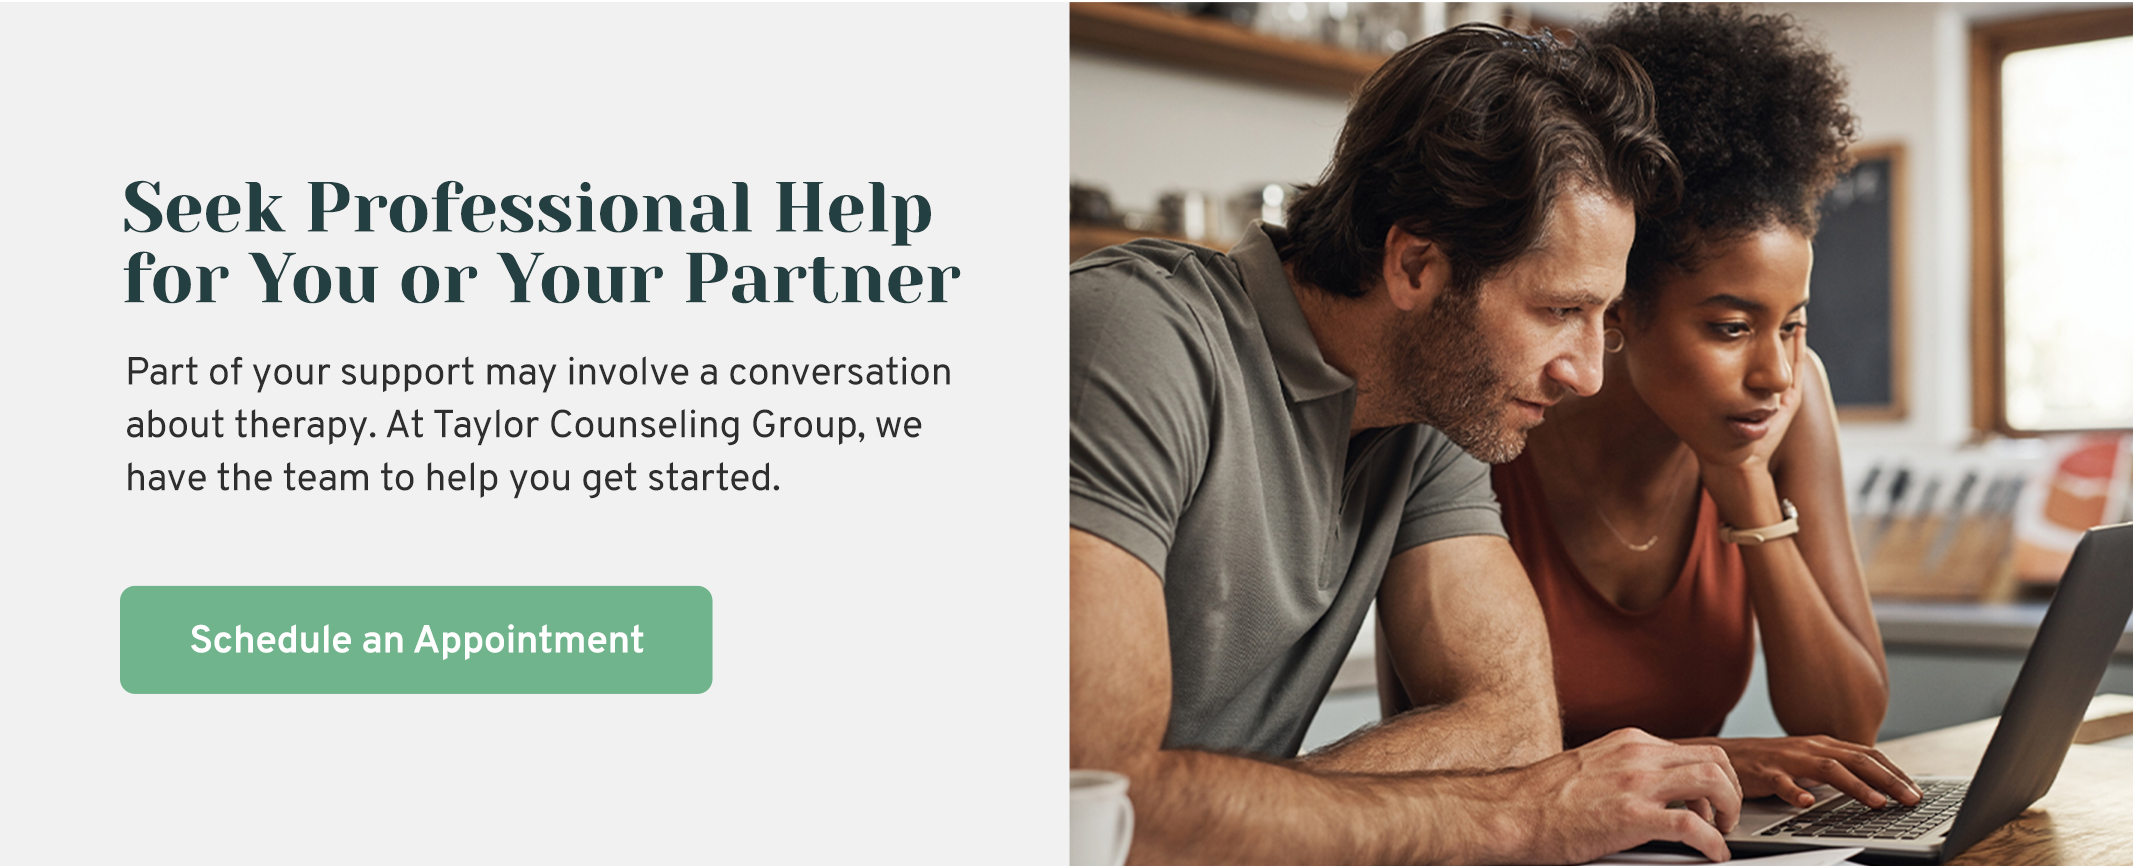 Seek Professional Help for You or Your Partner